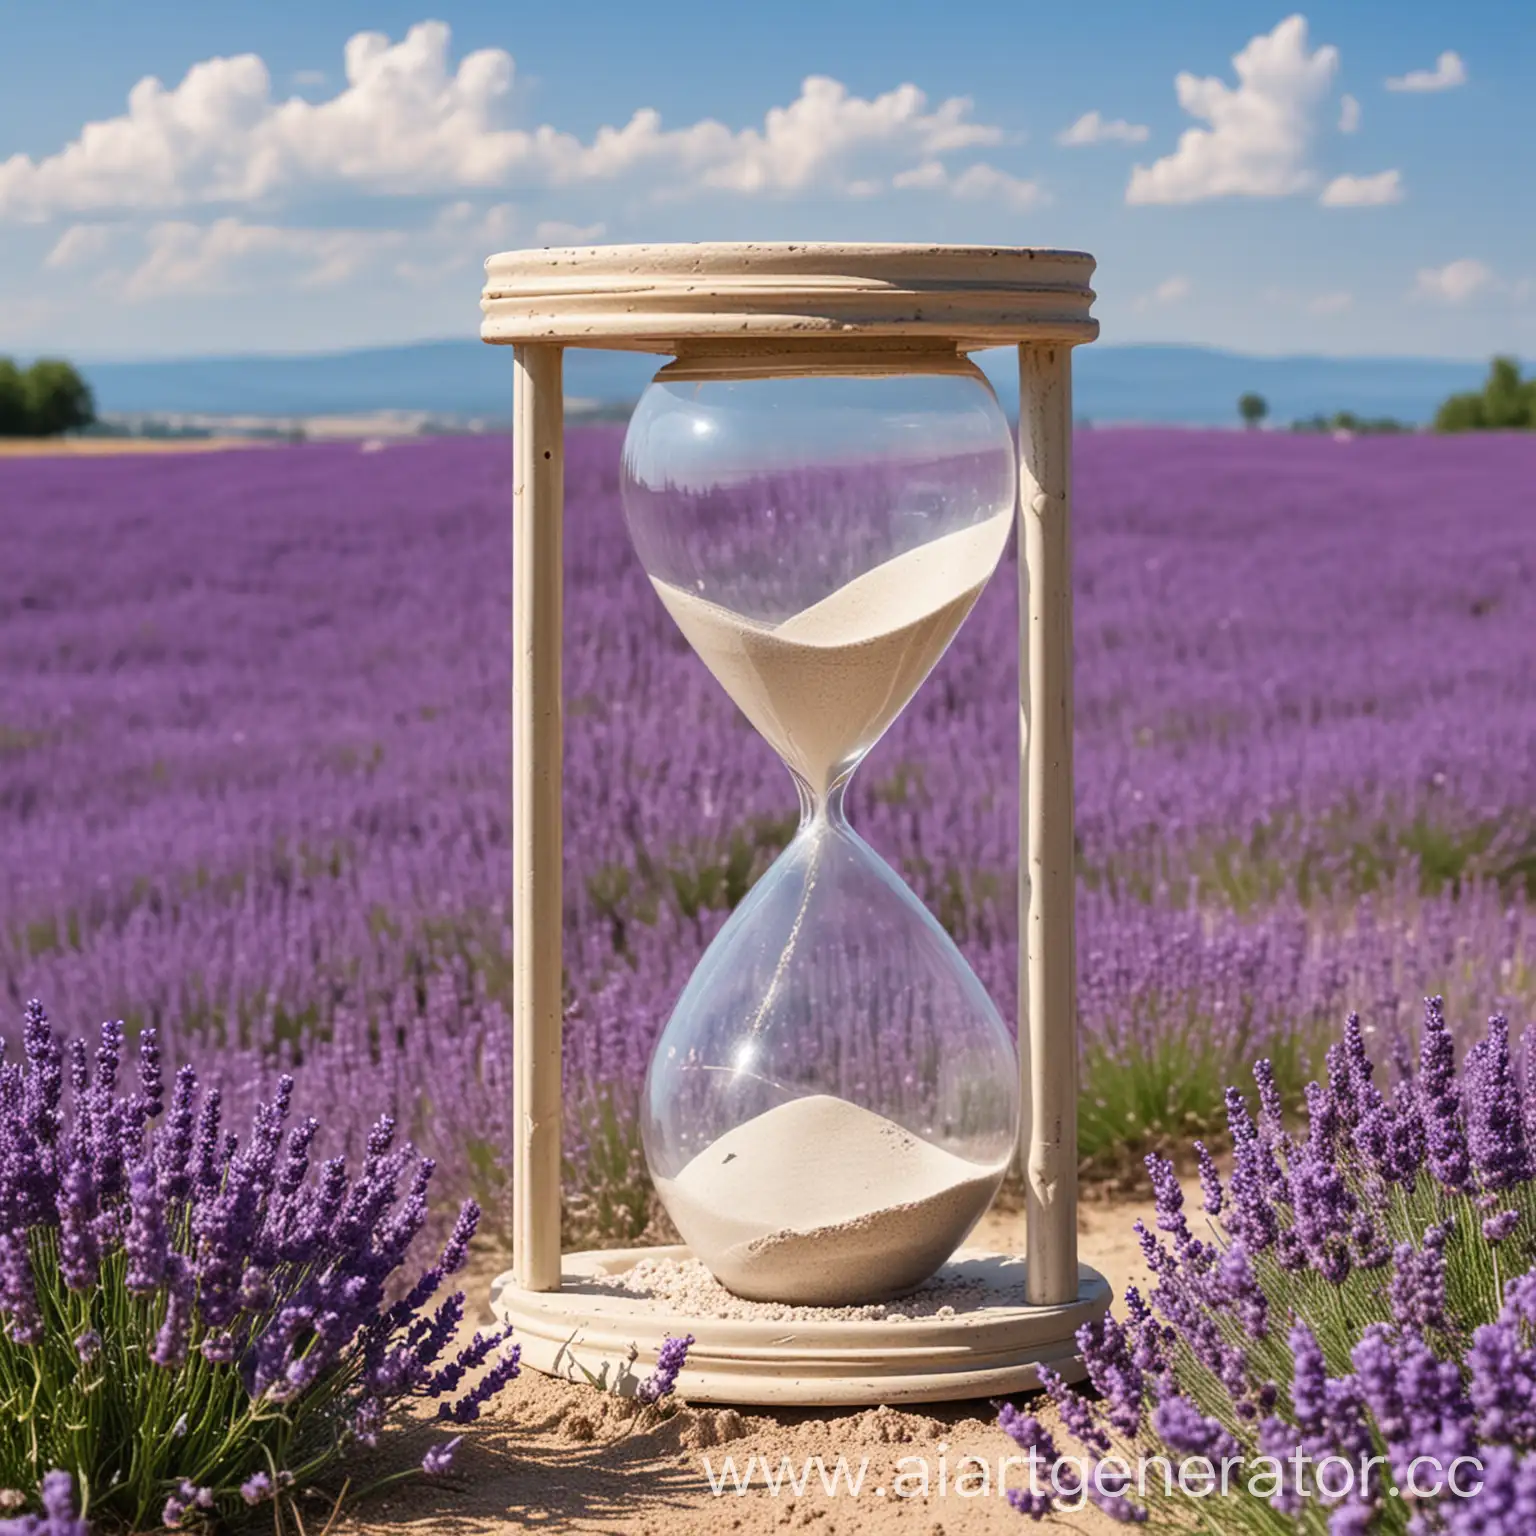 Large-Sandglass-with-White-Sand-on-Lavender-Field